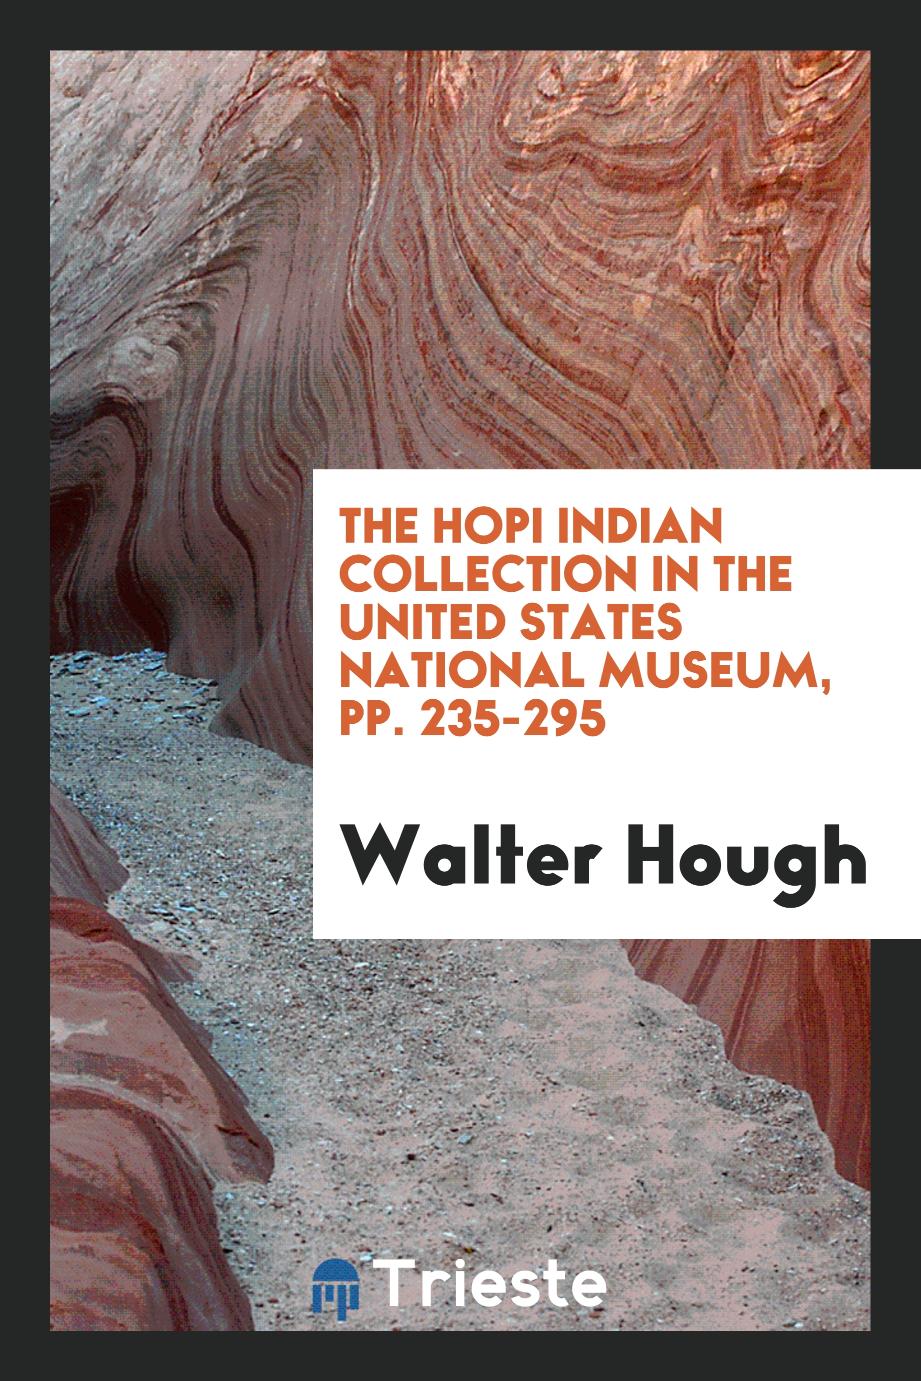 The Hopi Indian collection in the United States National Museum, pp. 235-295